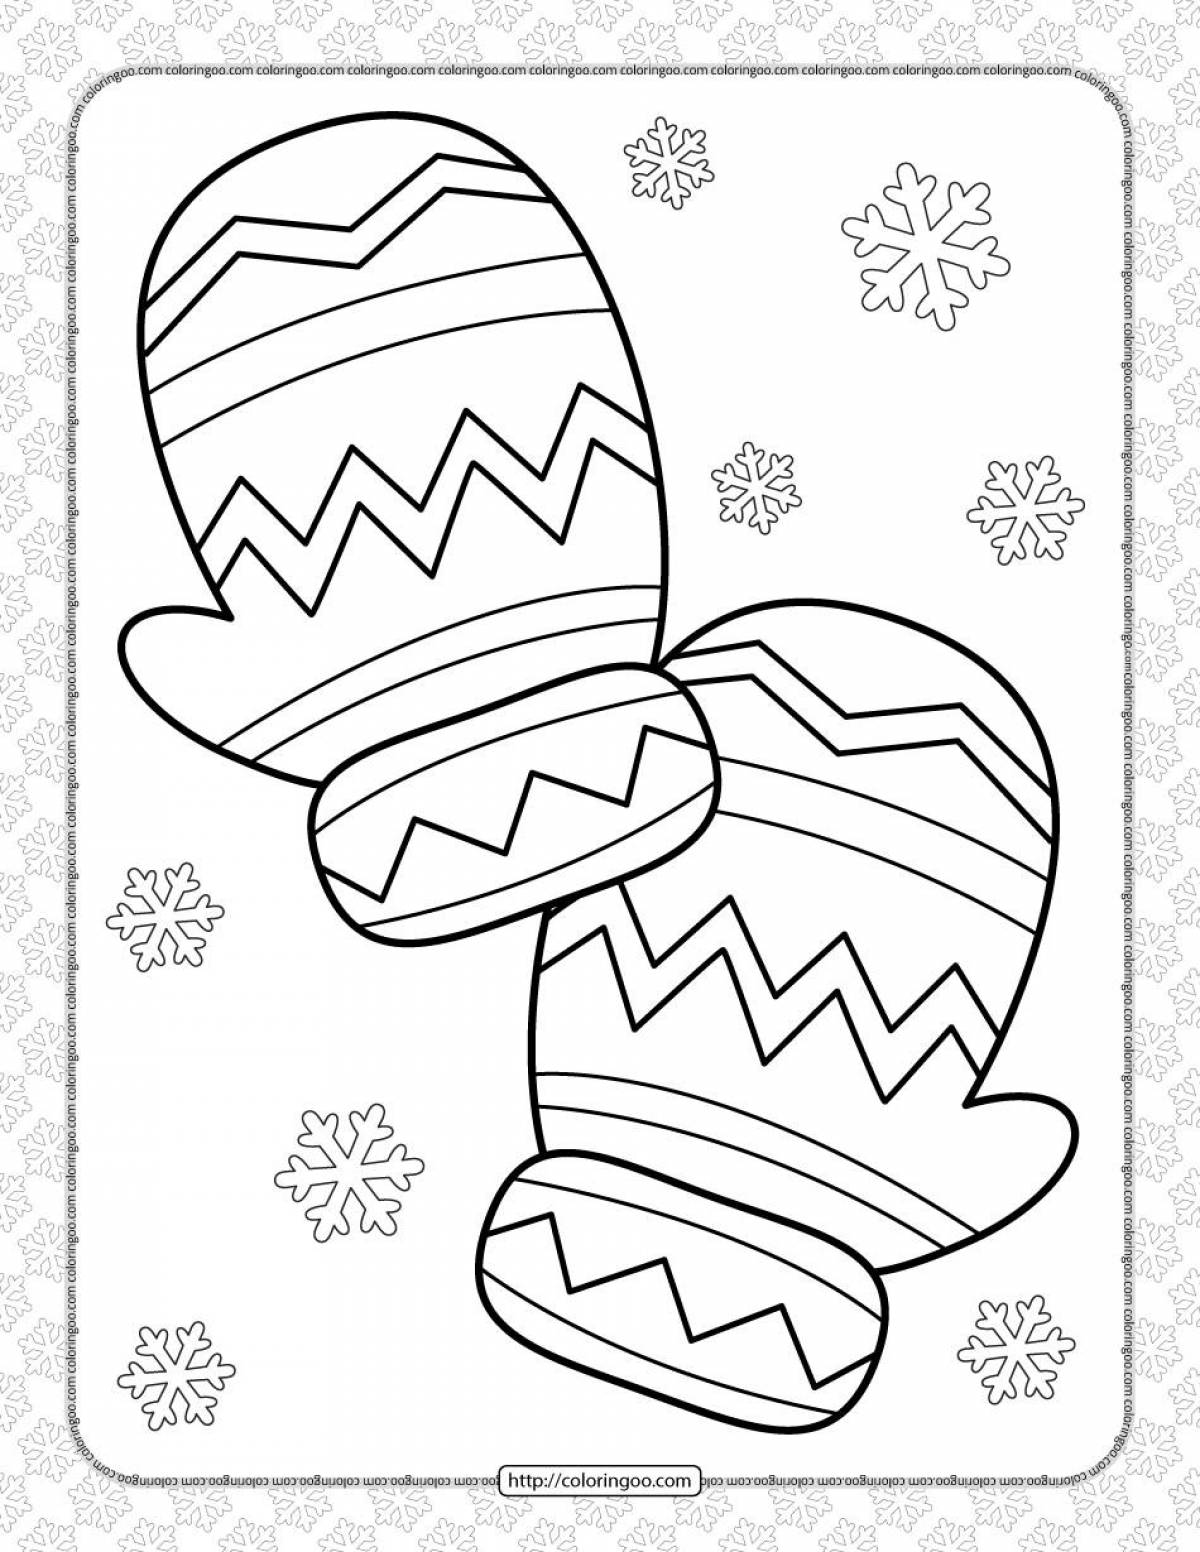 Great mitten coloring for kids